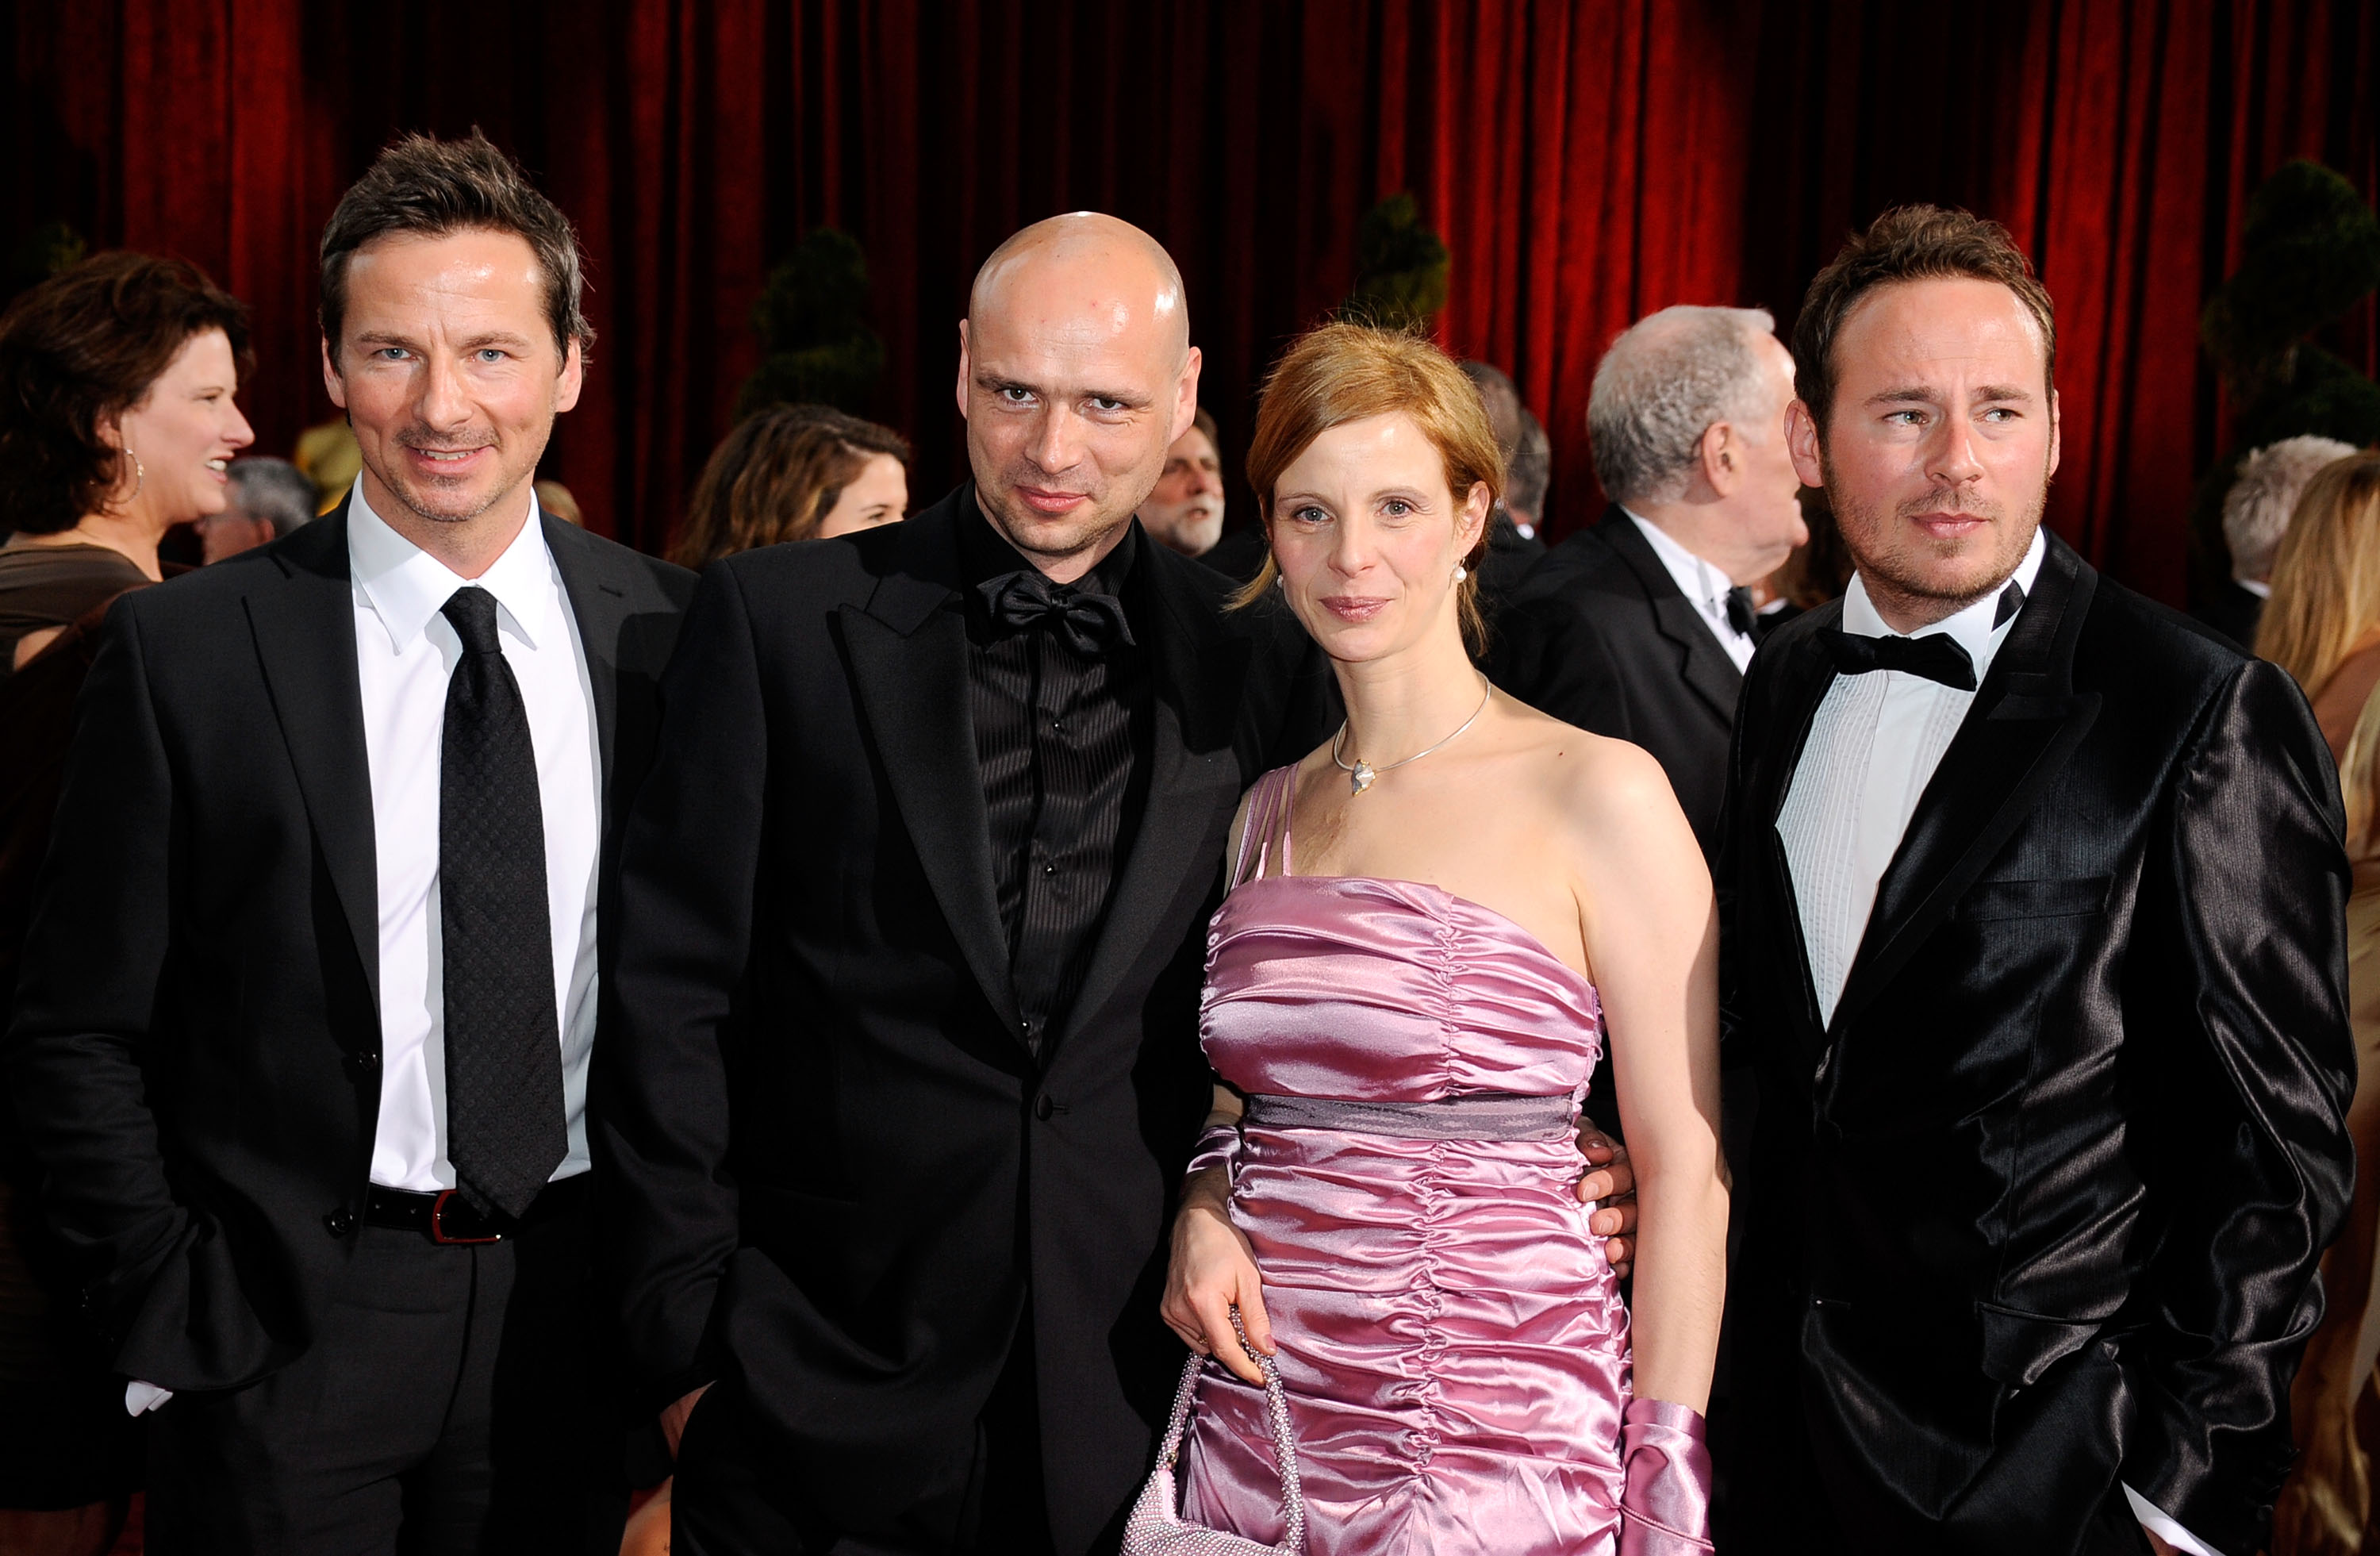 LOS ANGELES, CA - FEBRUARY 22: (L-R) Actor and producer David C. Bunners, Filmmaker Jochen Freydank, actress Julia Jaeger and screenwriter Johann A. Bunners arrive at the 81st Annual Academy Awards held at Kodak Theatre on February 22, 2009